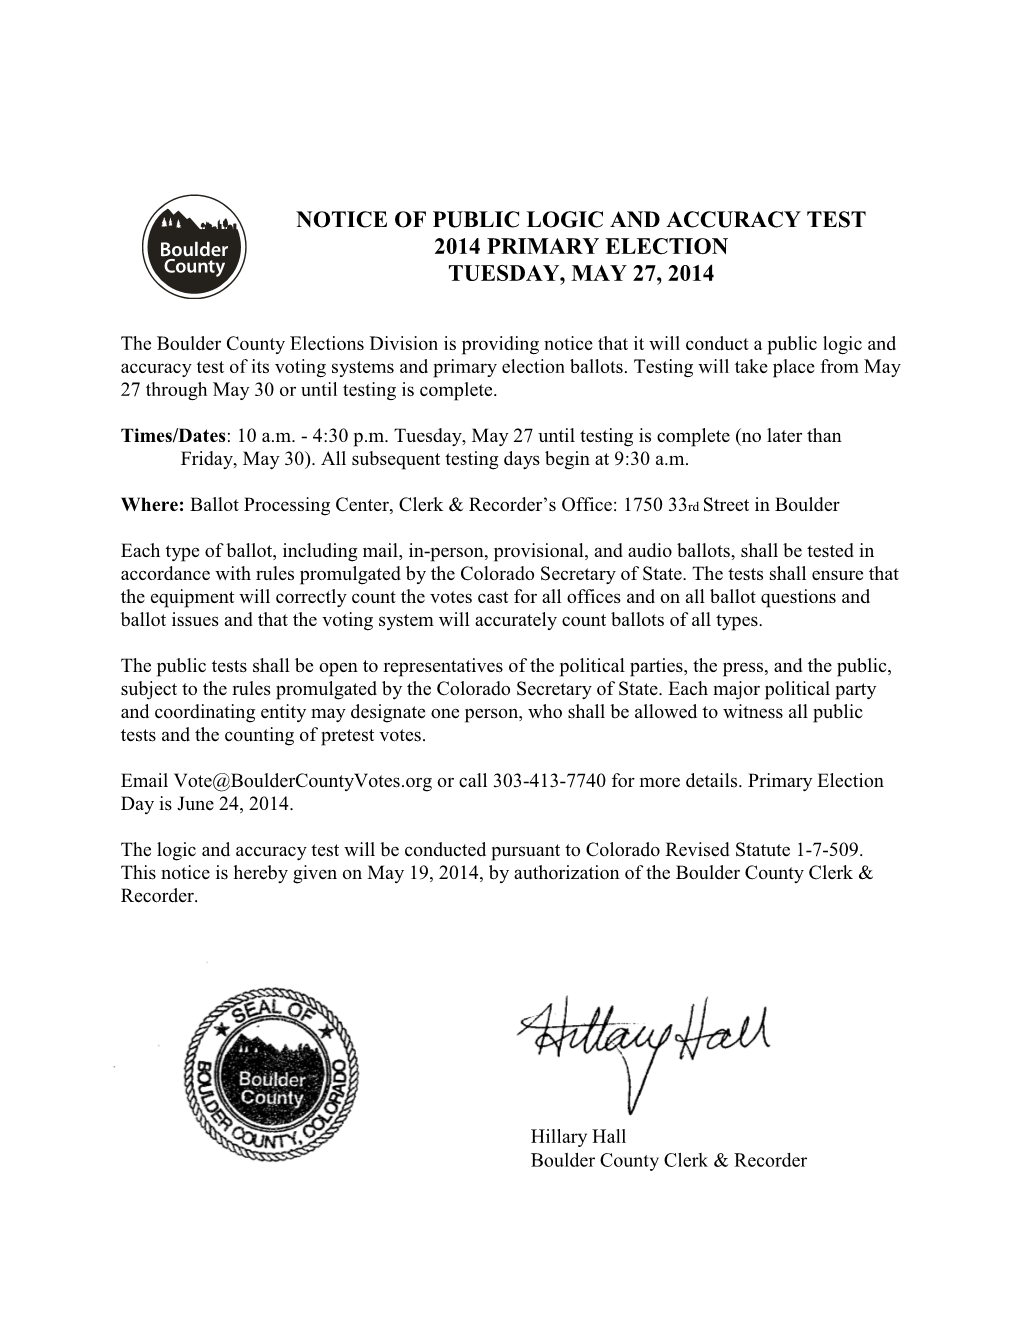 Notice of Public Logic and Accuracy Test 2014 Primary Election Tuesday, May 27, 2014